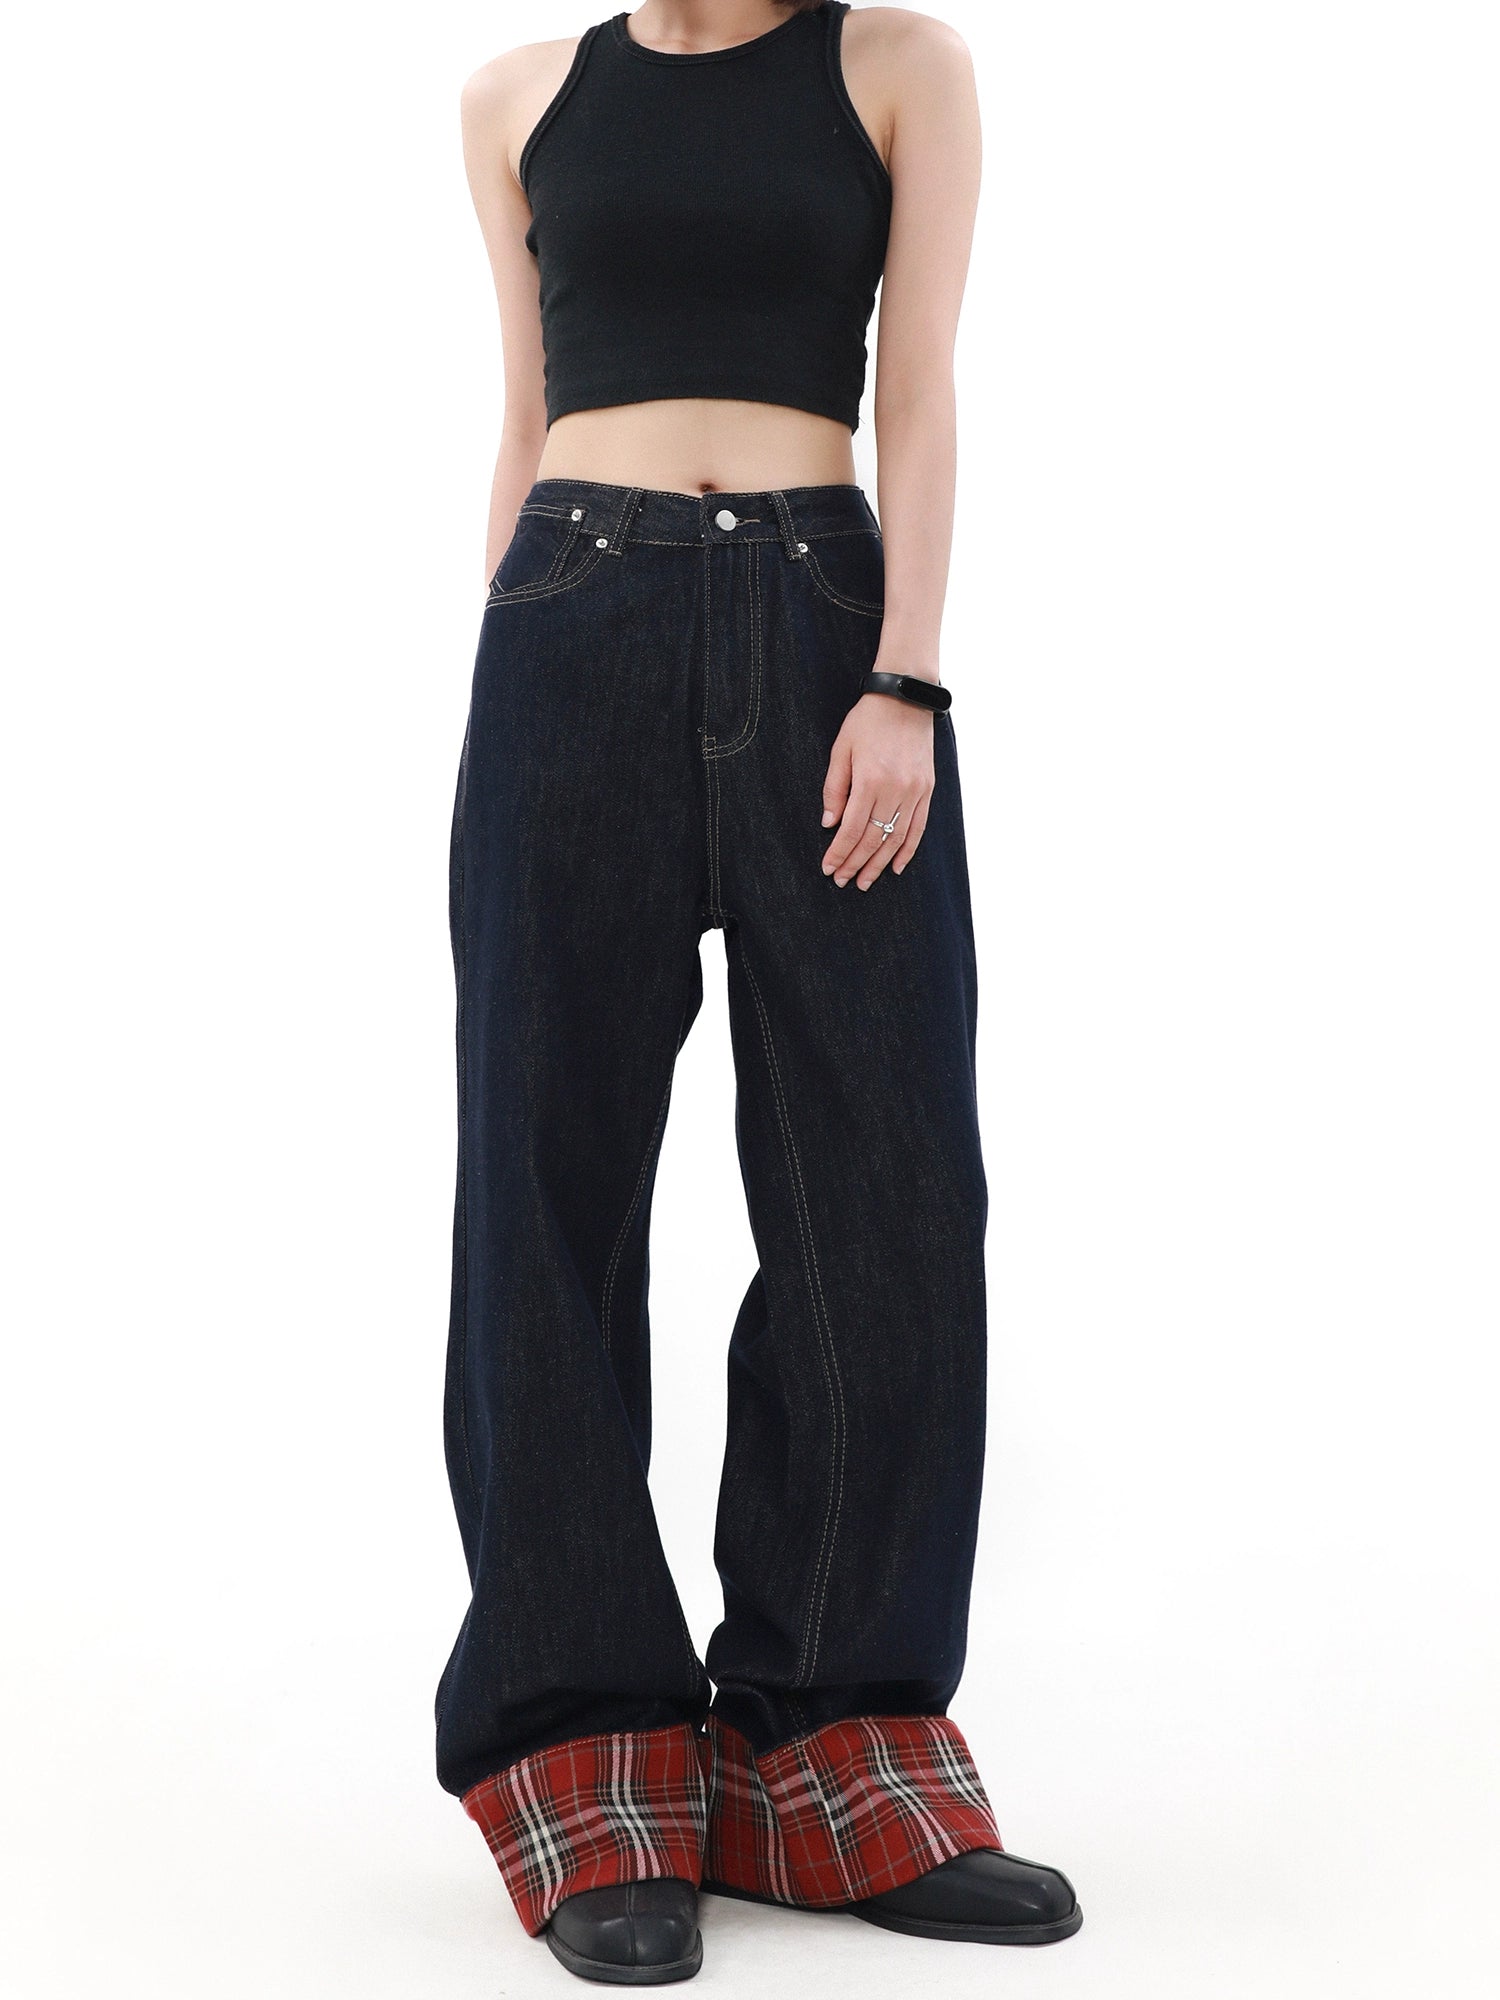 MRNEARLY Plaid-Lined Wide Leg Jeans - Unisex Classic Denim with a Twist